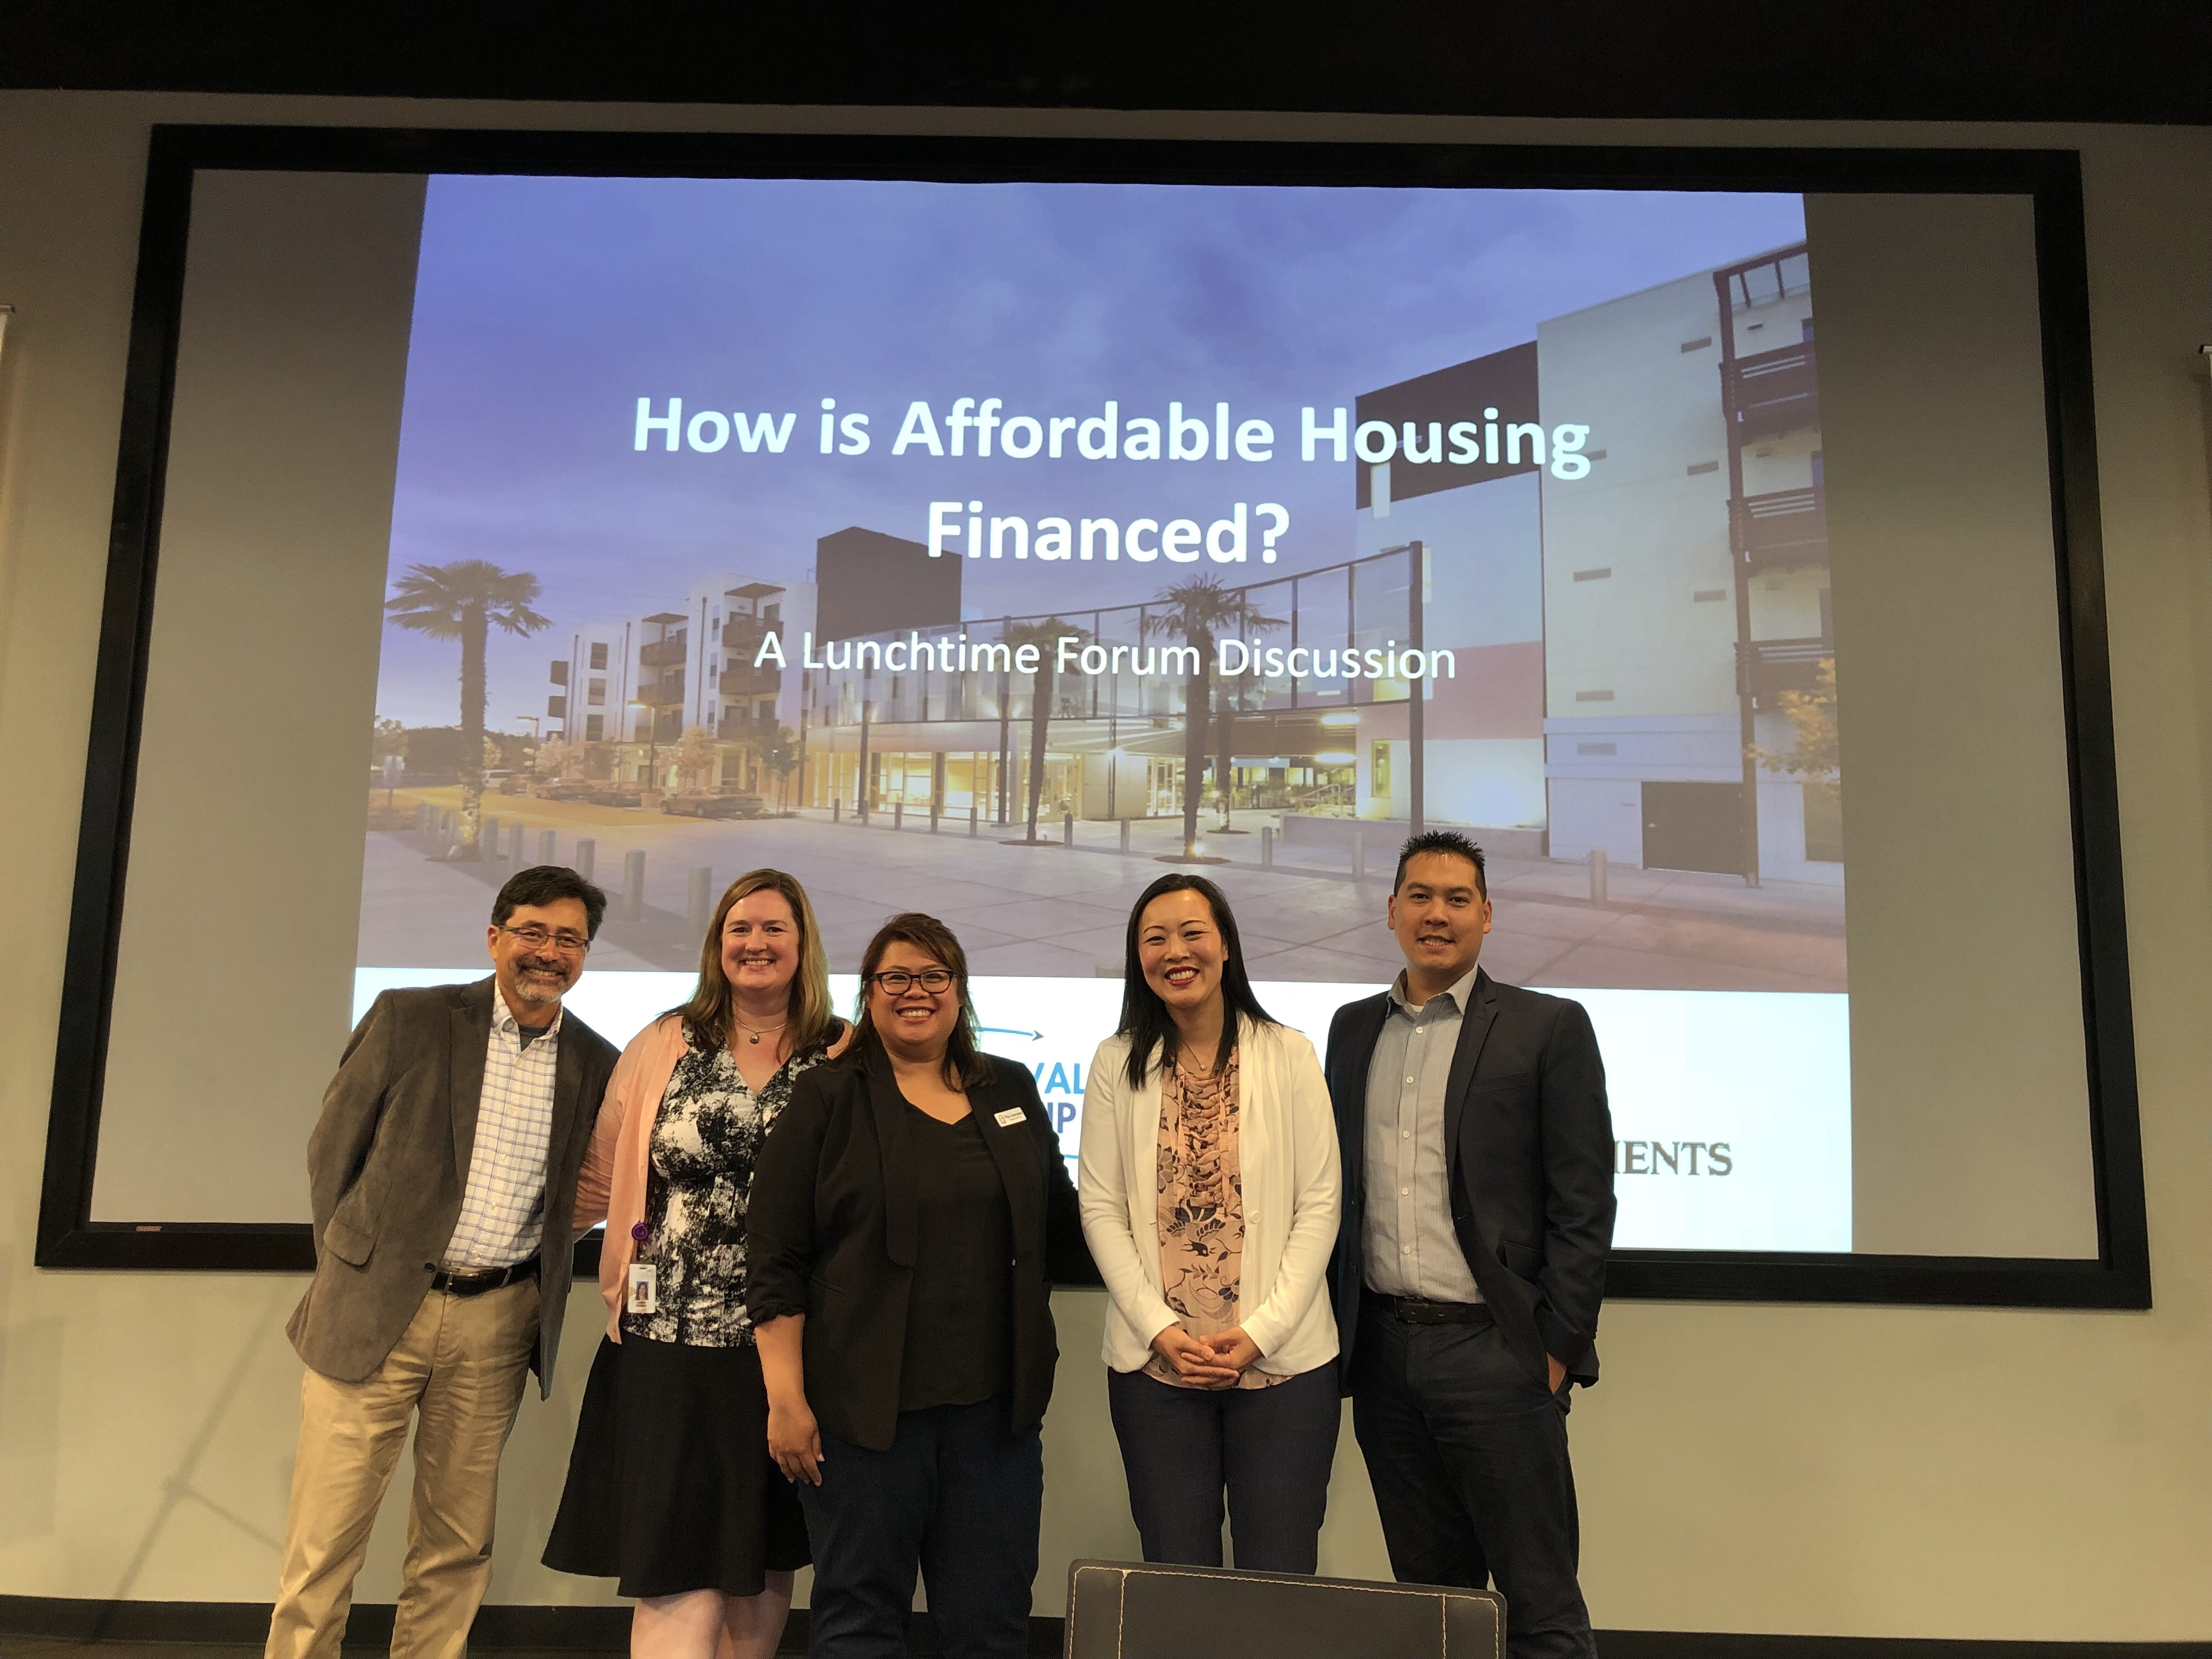 L to R: Eden Housing Senior VP of Real Estate Andy Madeira, SJ Housing Policy Division Manager Kristin Clements, SV@Home's Pilar Lorenzana, SV Bank's Fiona Hsu, and SVLG's Nathathan Ho